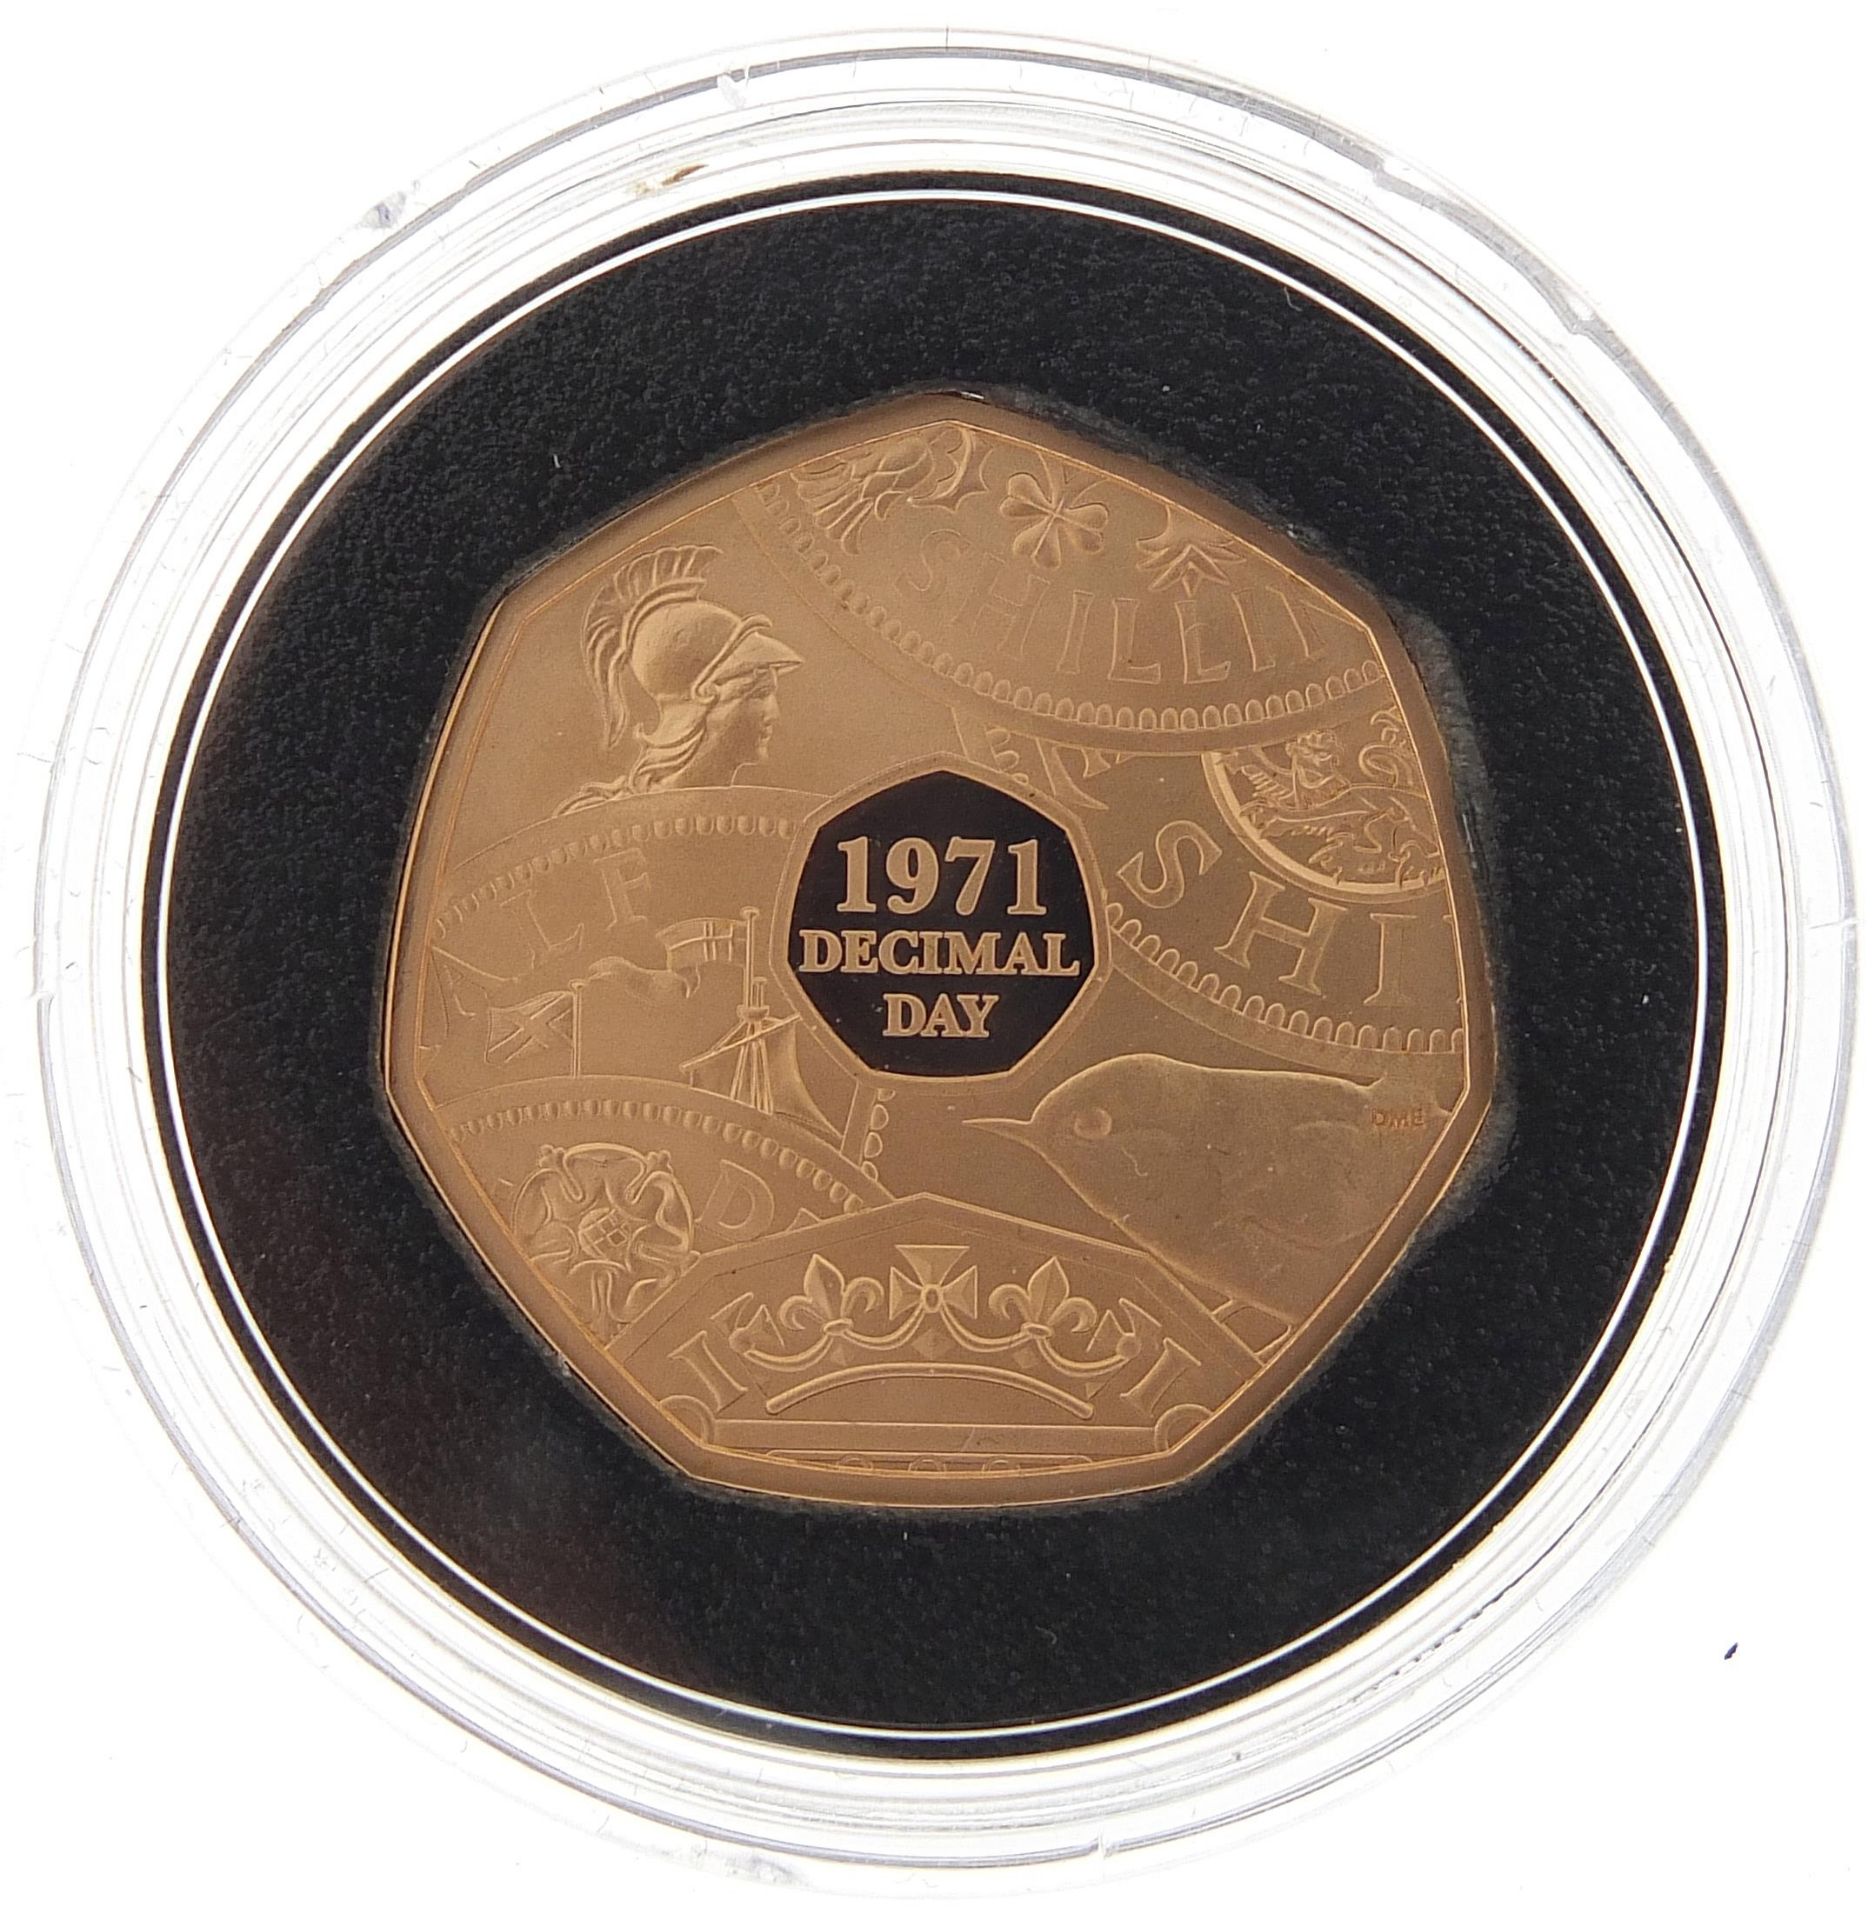 Elizabeth II 2021 Fiftieth Anniversary of Decimal Day fifty pence gold proof coin with box and - Image 2 of 4